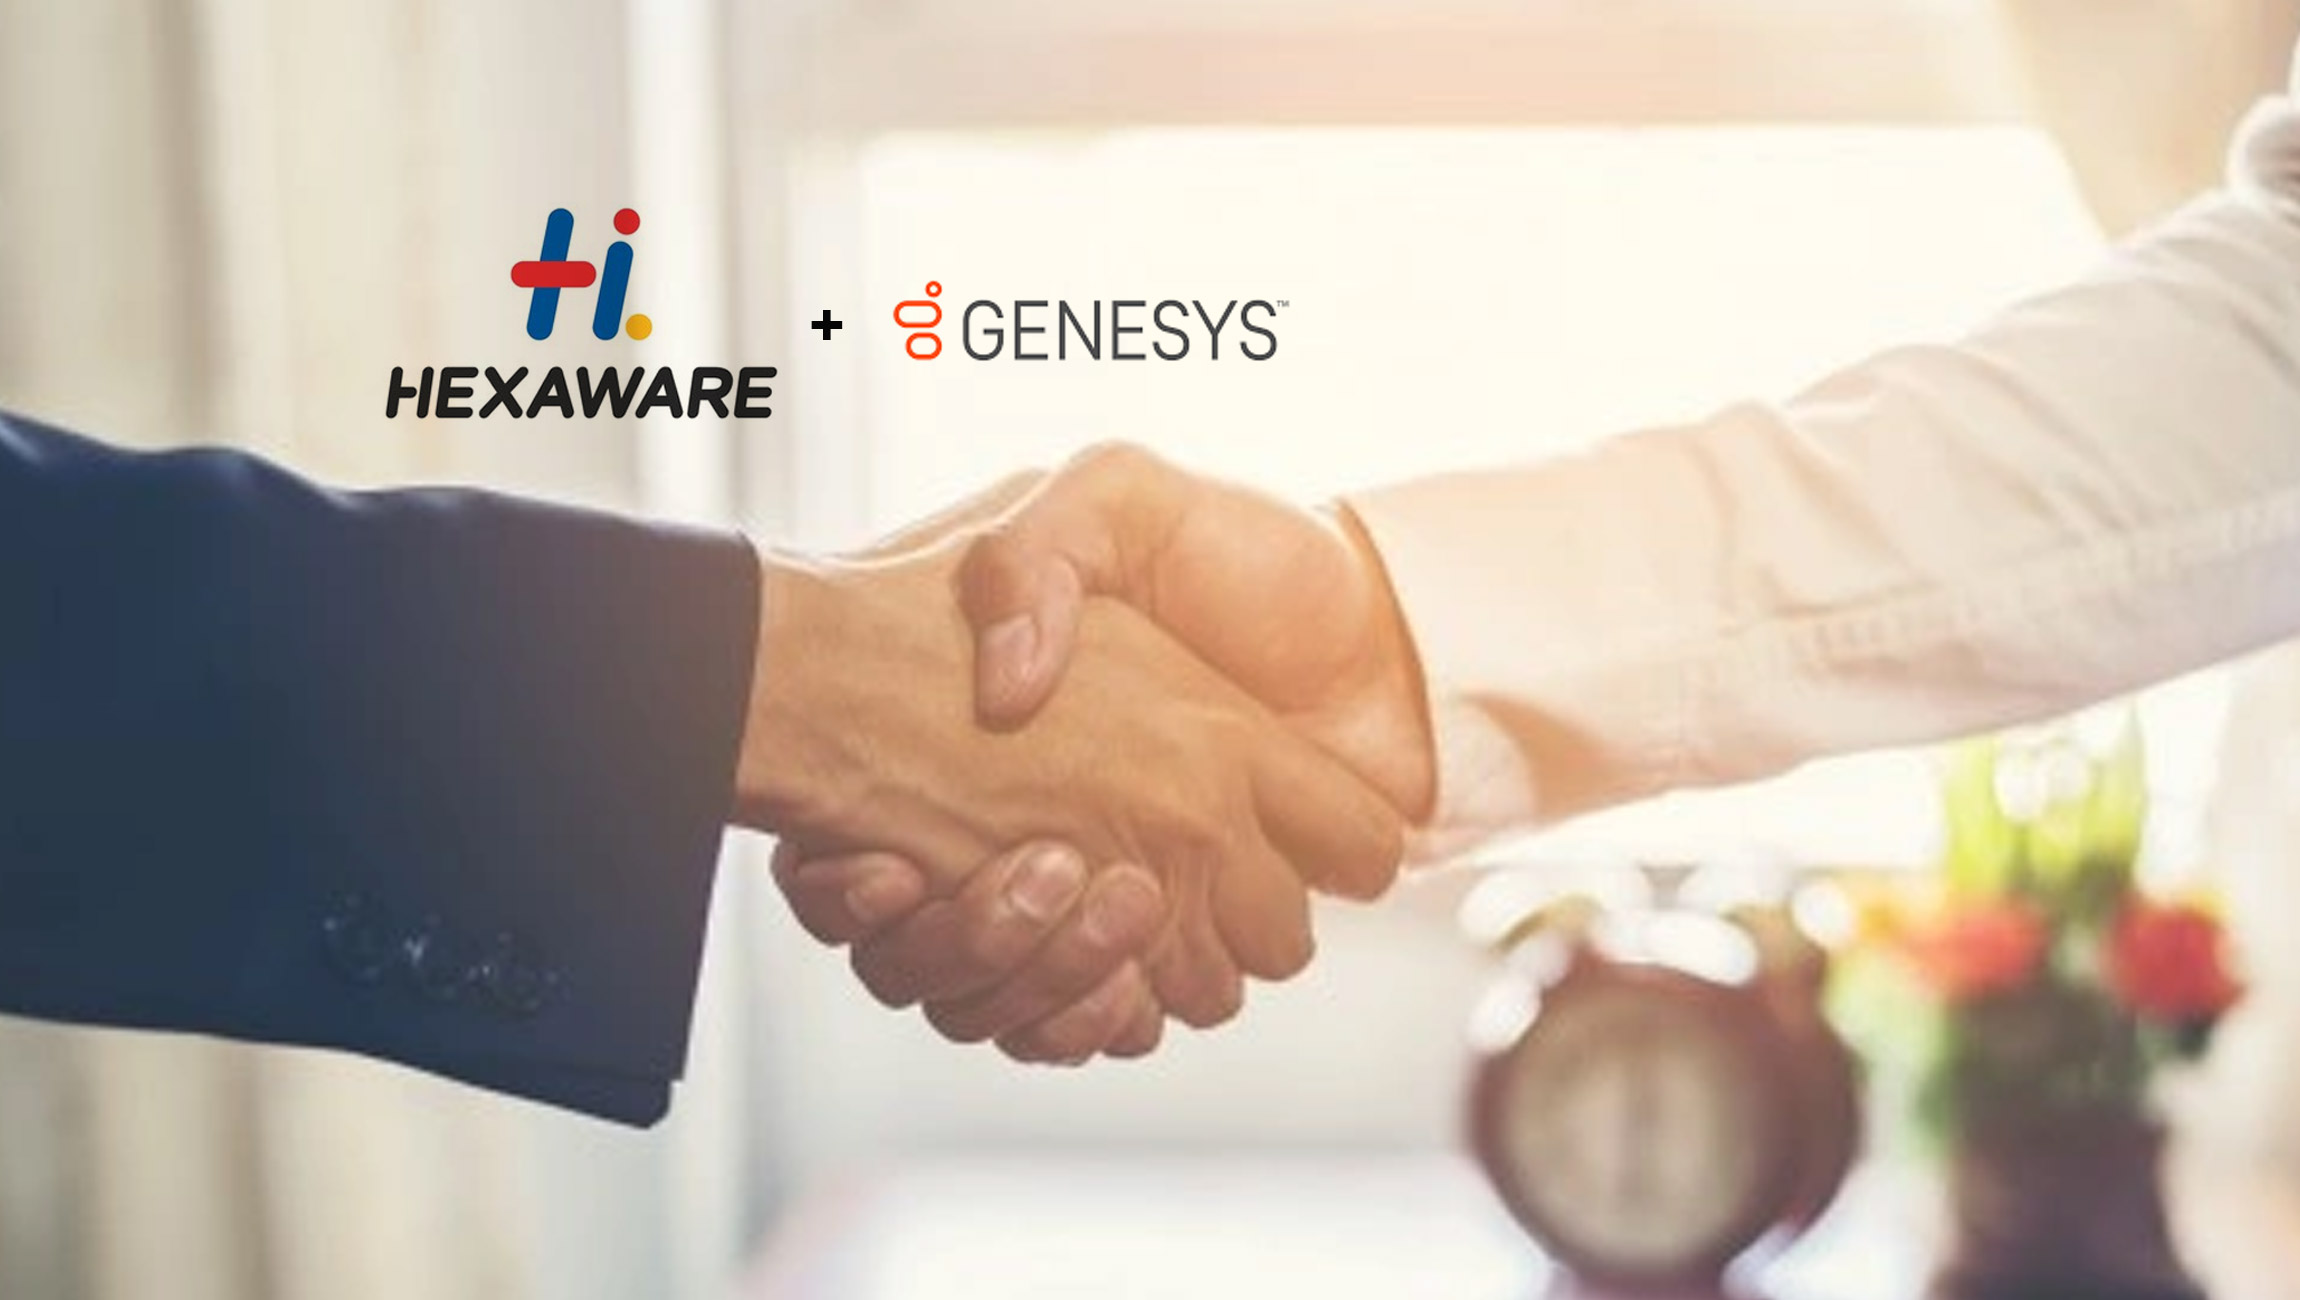 Hexaware-Partners-with-Genesys-to-Help-Companies-Deliver-Hyper-Personalized-Customer-Service-Driven-by-Empathy